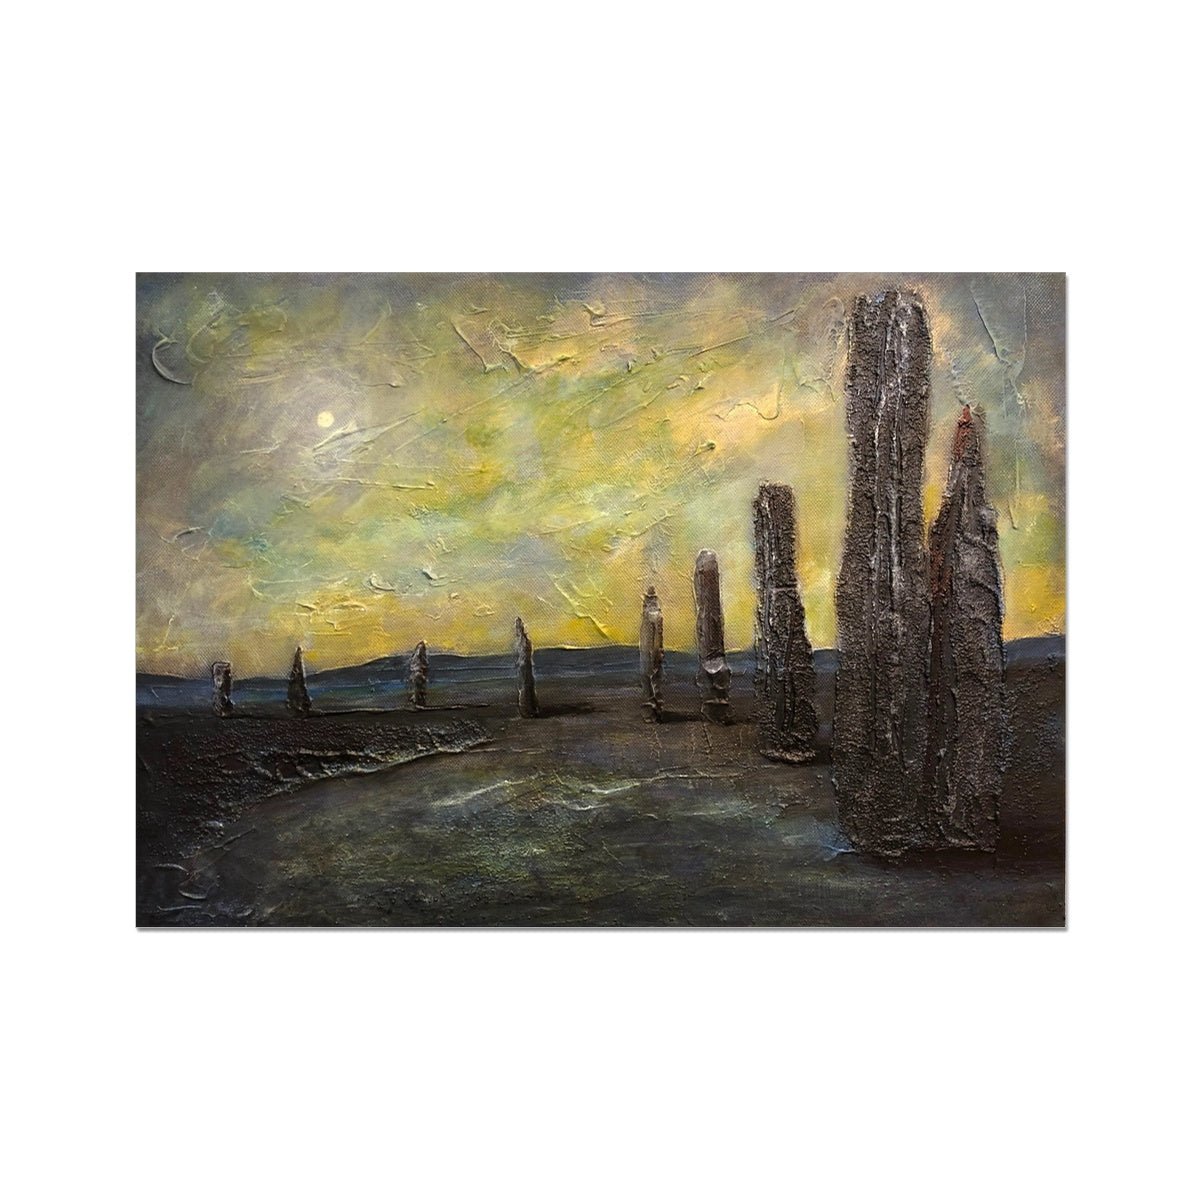 An Ethereal Ring Of Brodgar Orkney Painting | Fine Art Prints From Scotland-Unframed Prints-Orkney Art Gallery-A2 Landscape-Paintings, Prints, Homeware, Art Gifts From Scotland By Scottish Artist Kevin Hunter